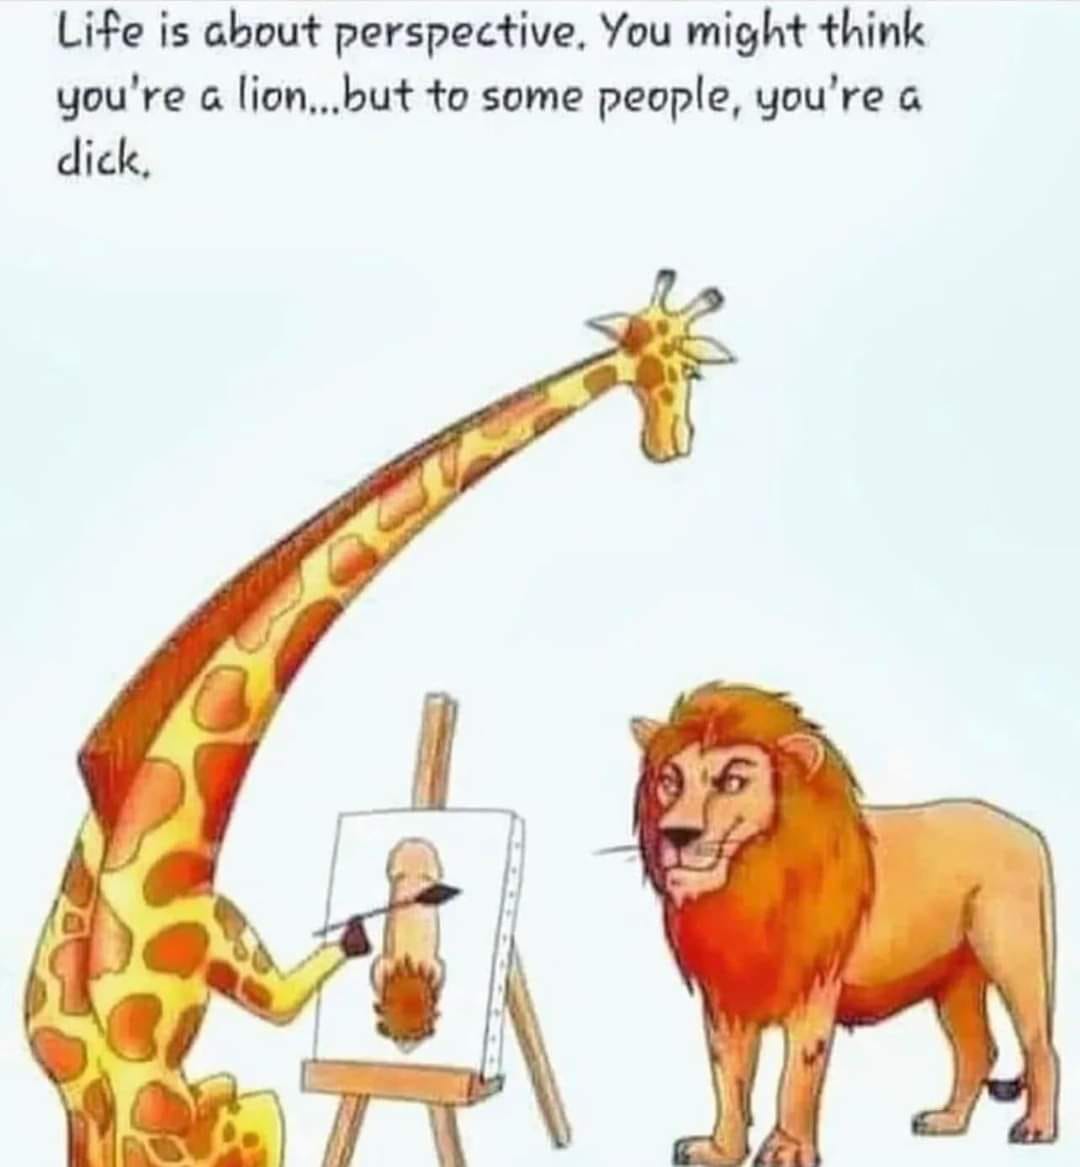 life is about perspective, you might think you're a lion, but to some people, you're a dick, lol